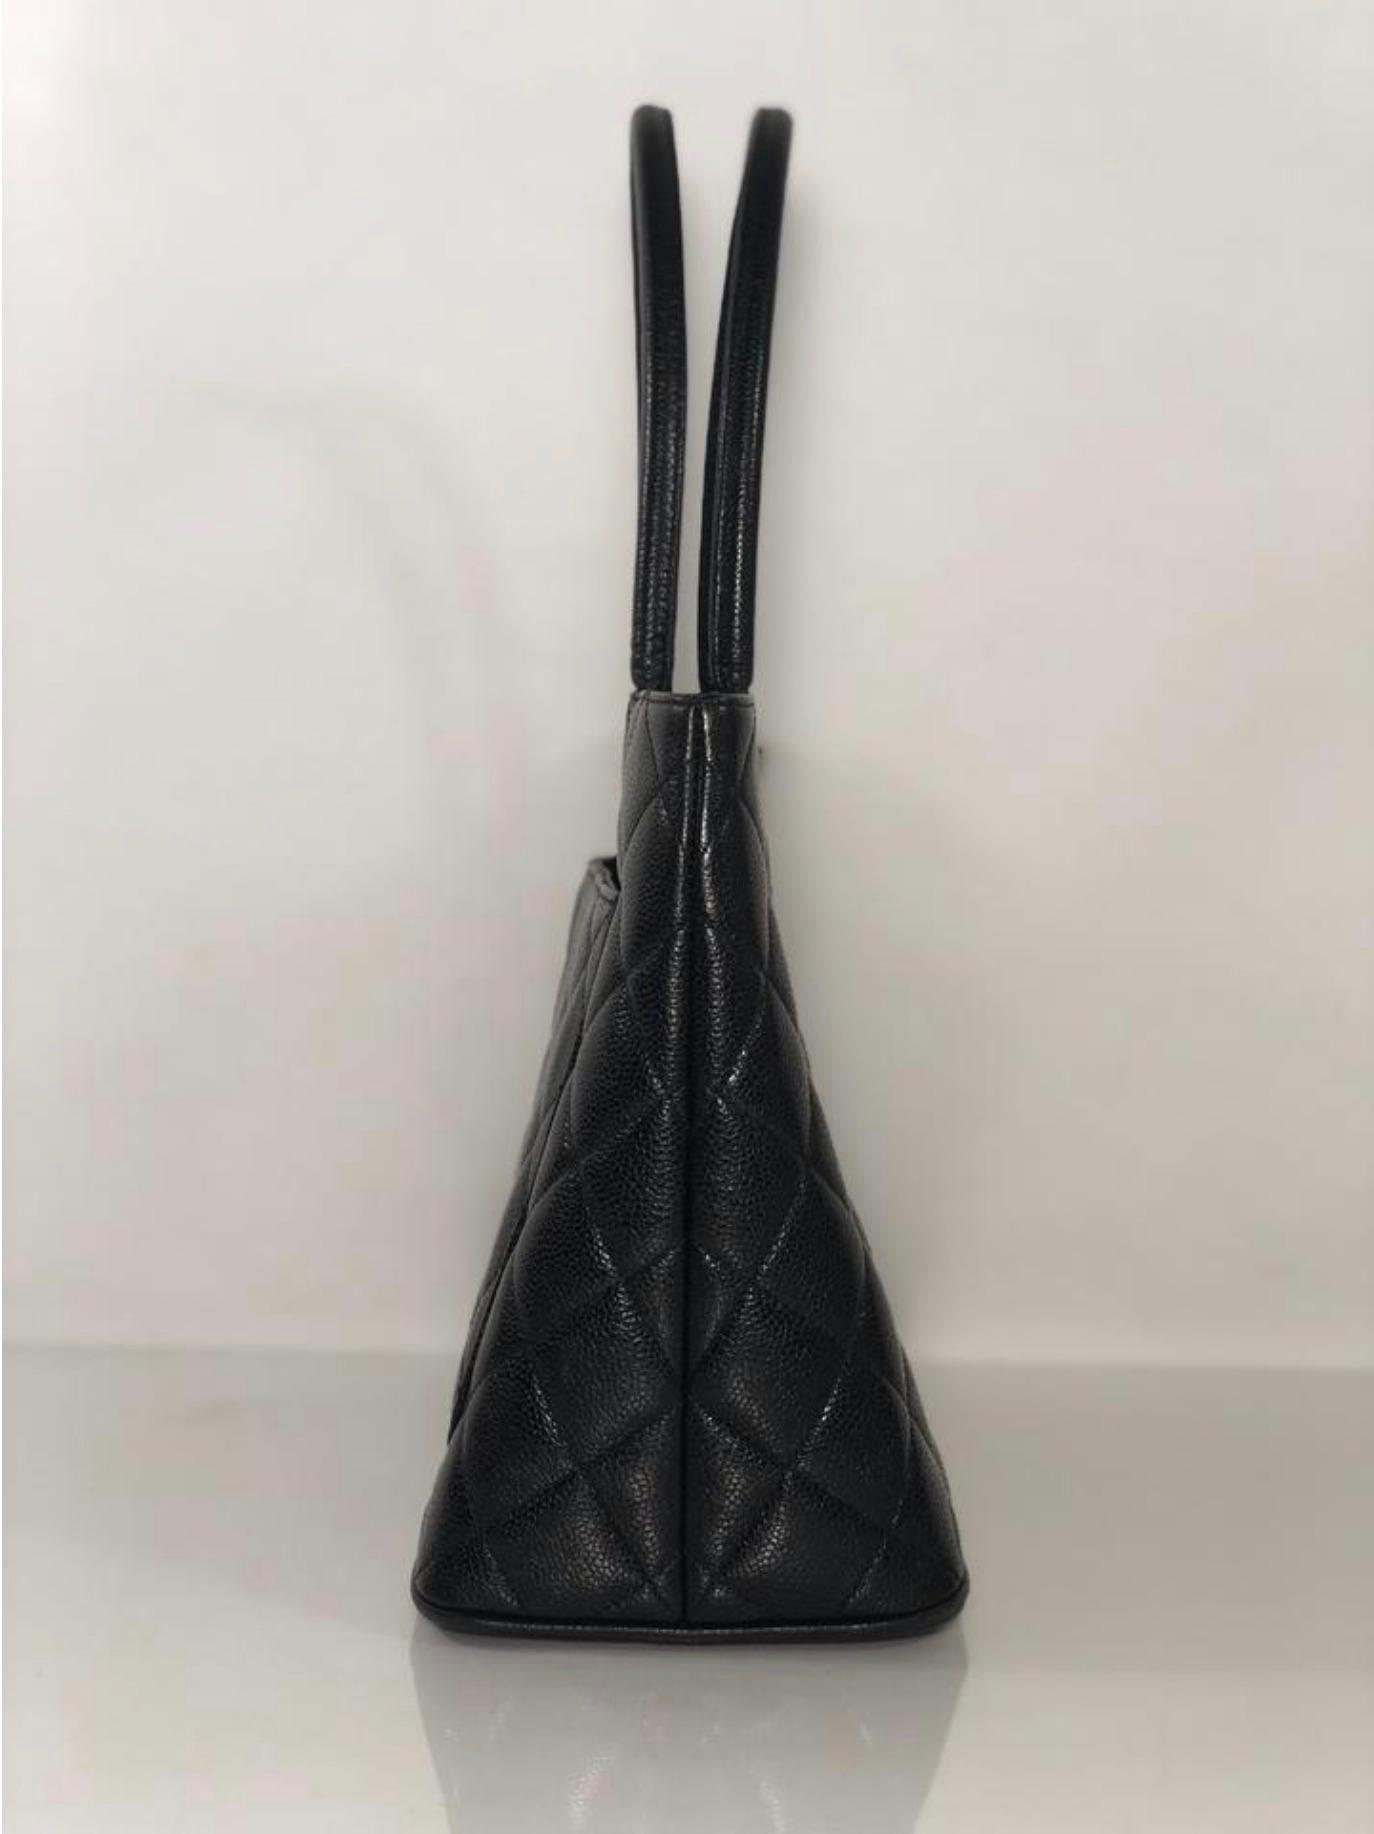  Chanel Caviar Leather Medallion with Silver Hardware in Black Shoulder Handbag In Good Condition For Sale In Saint Charles, IL